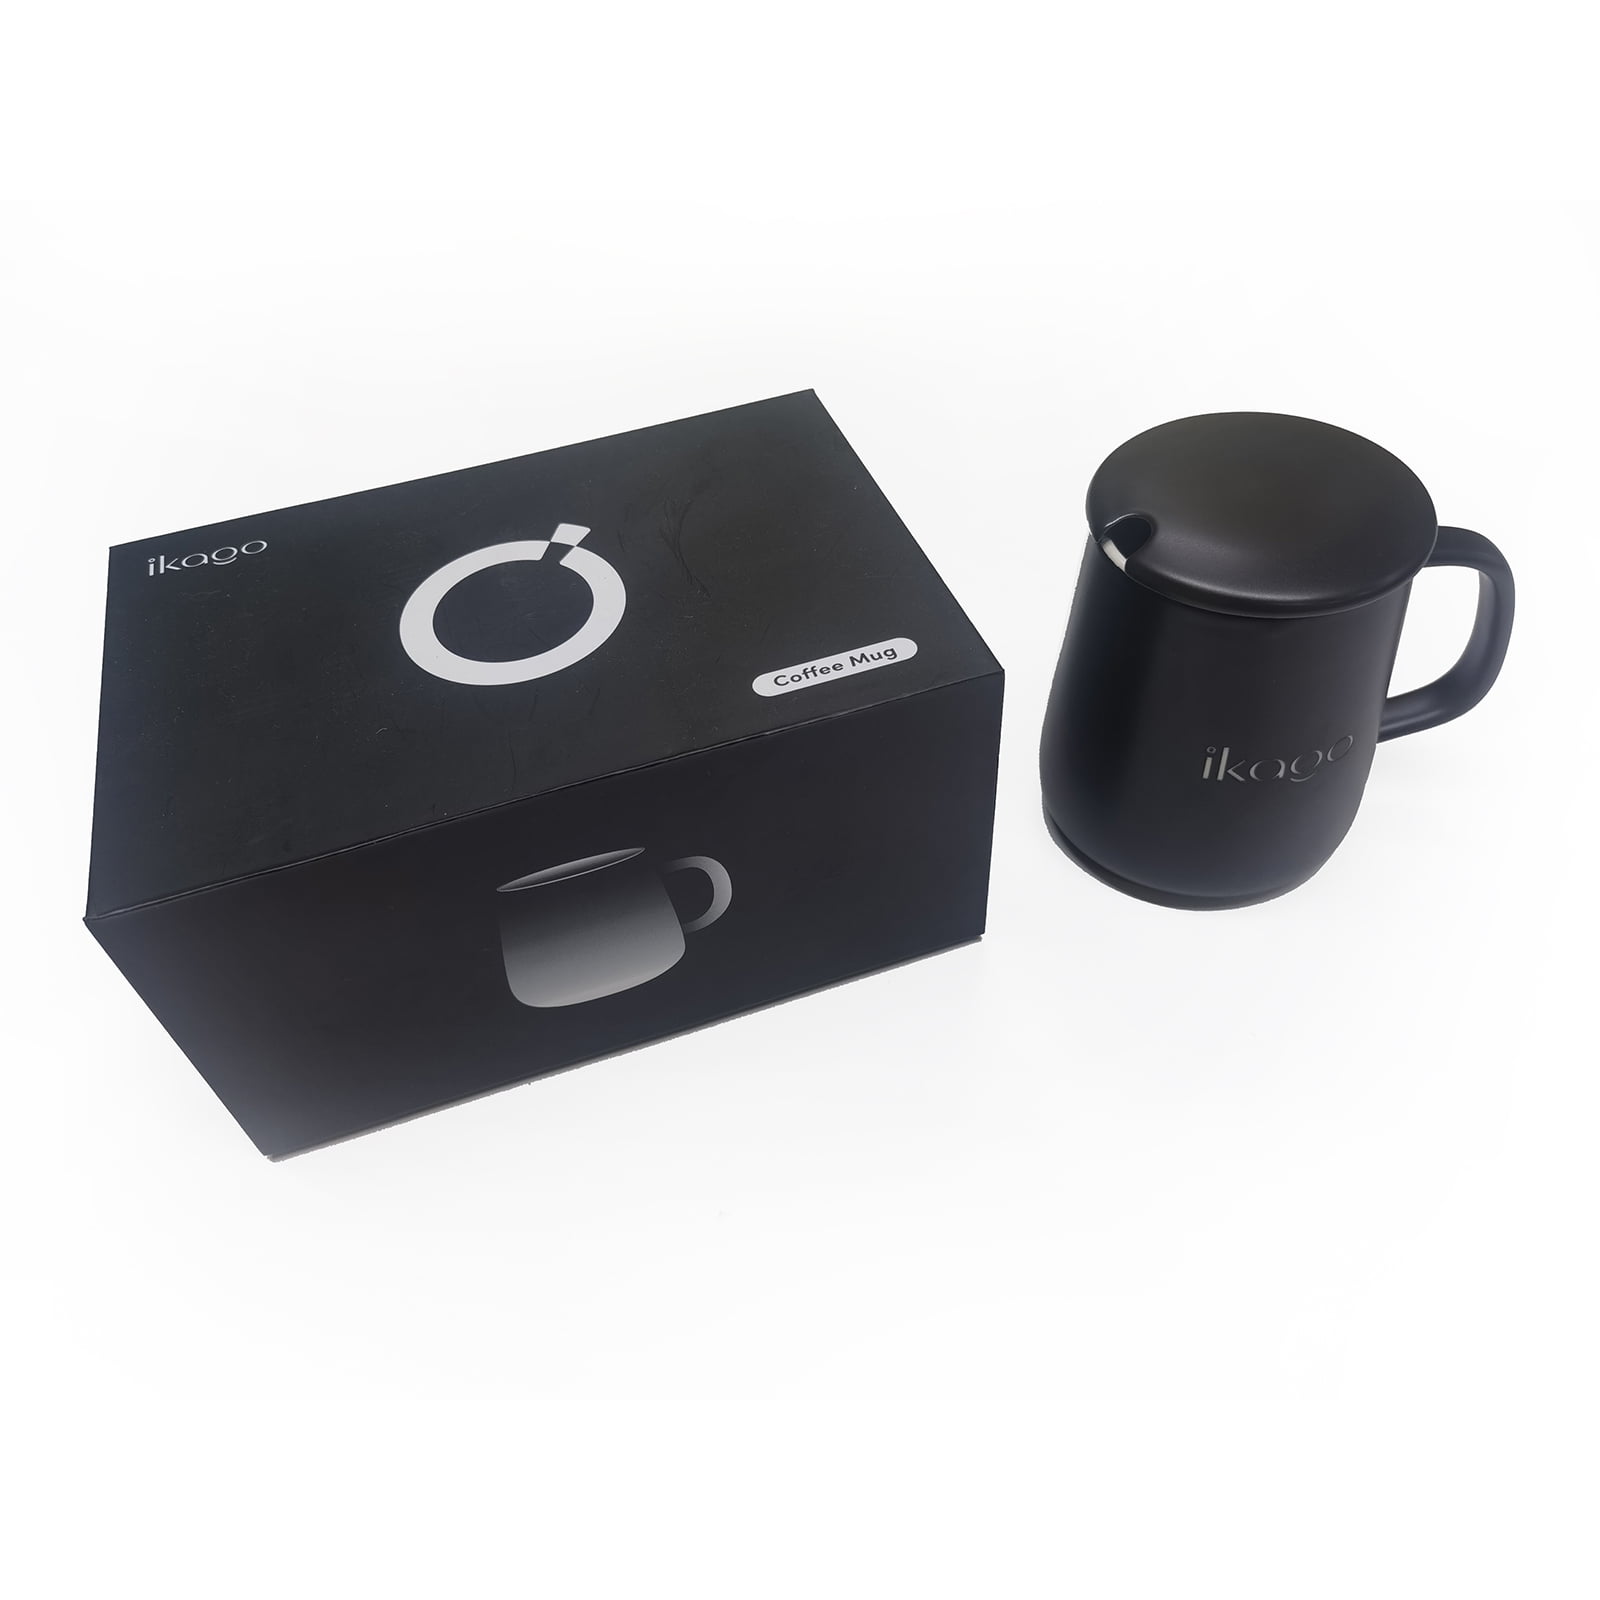 The Best Gift for Coffee Lovers! IKago Mug Warmer Set Review